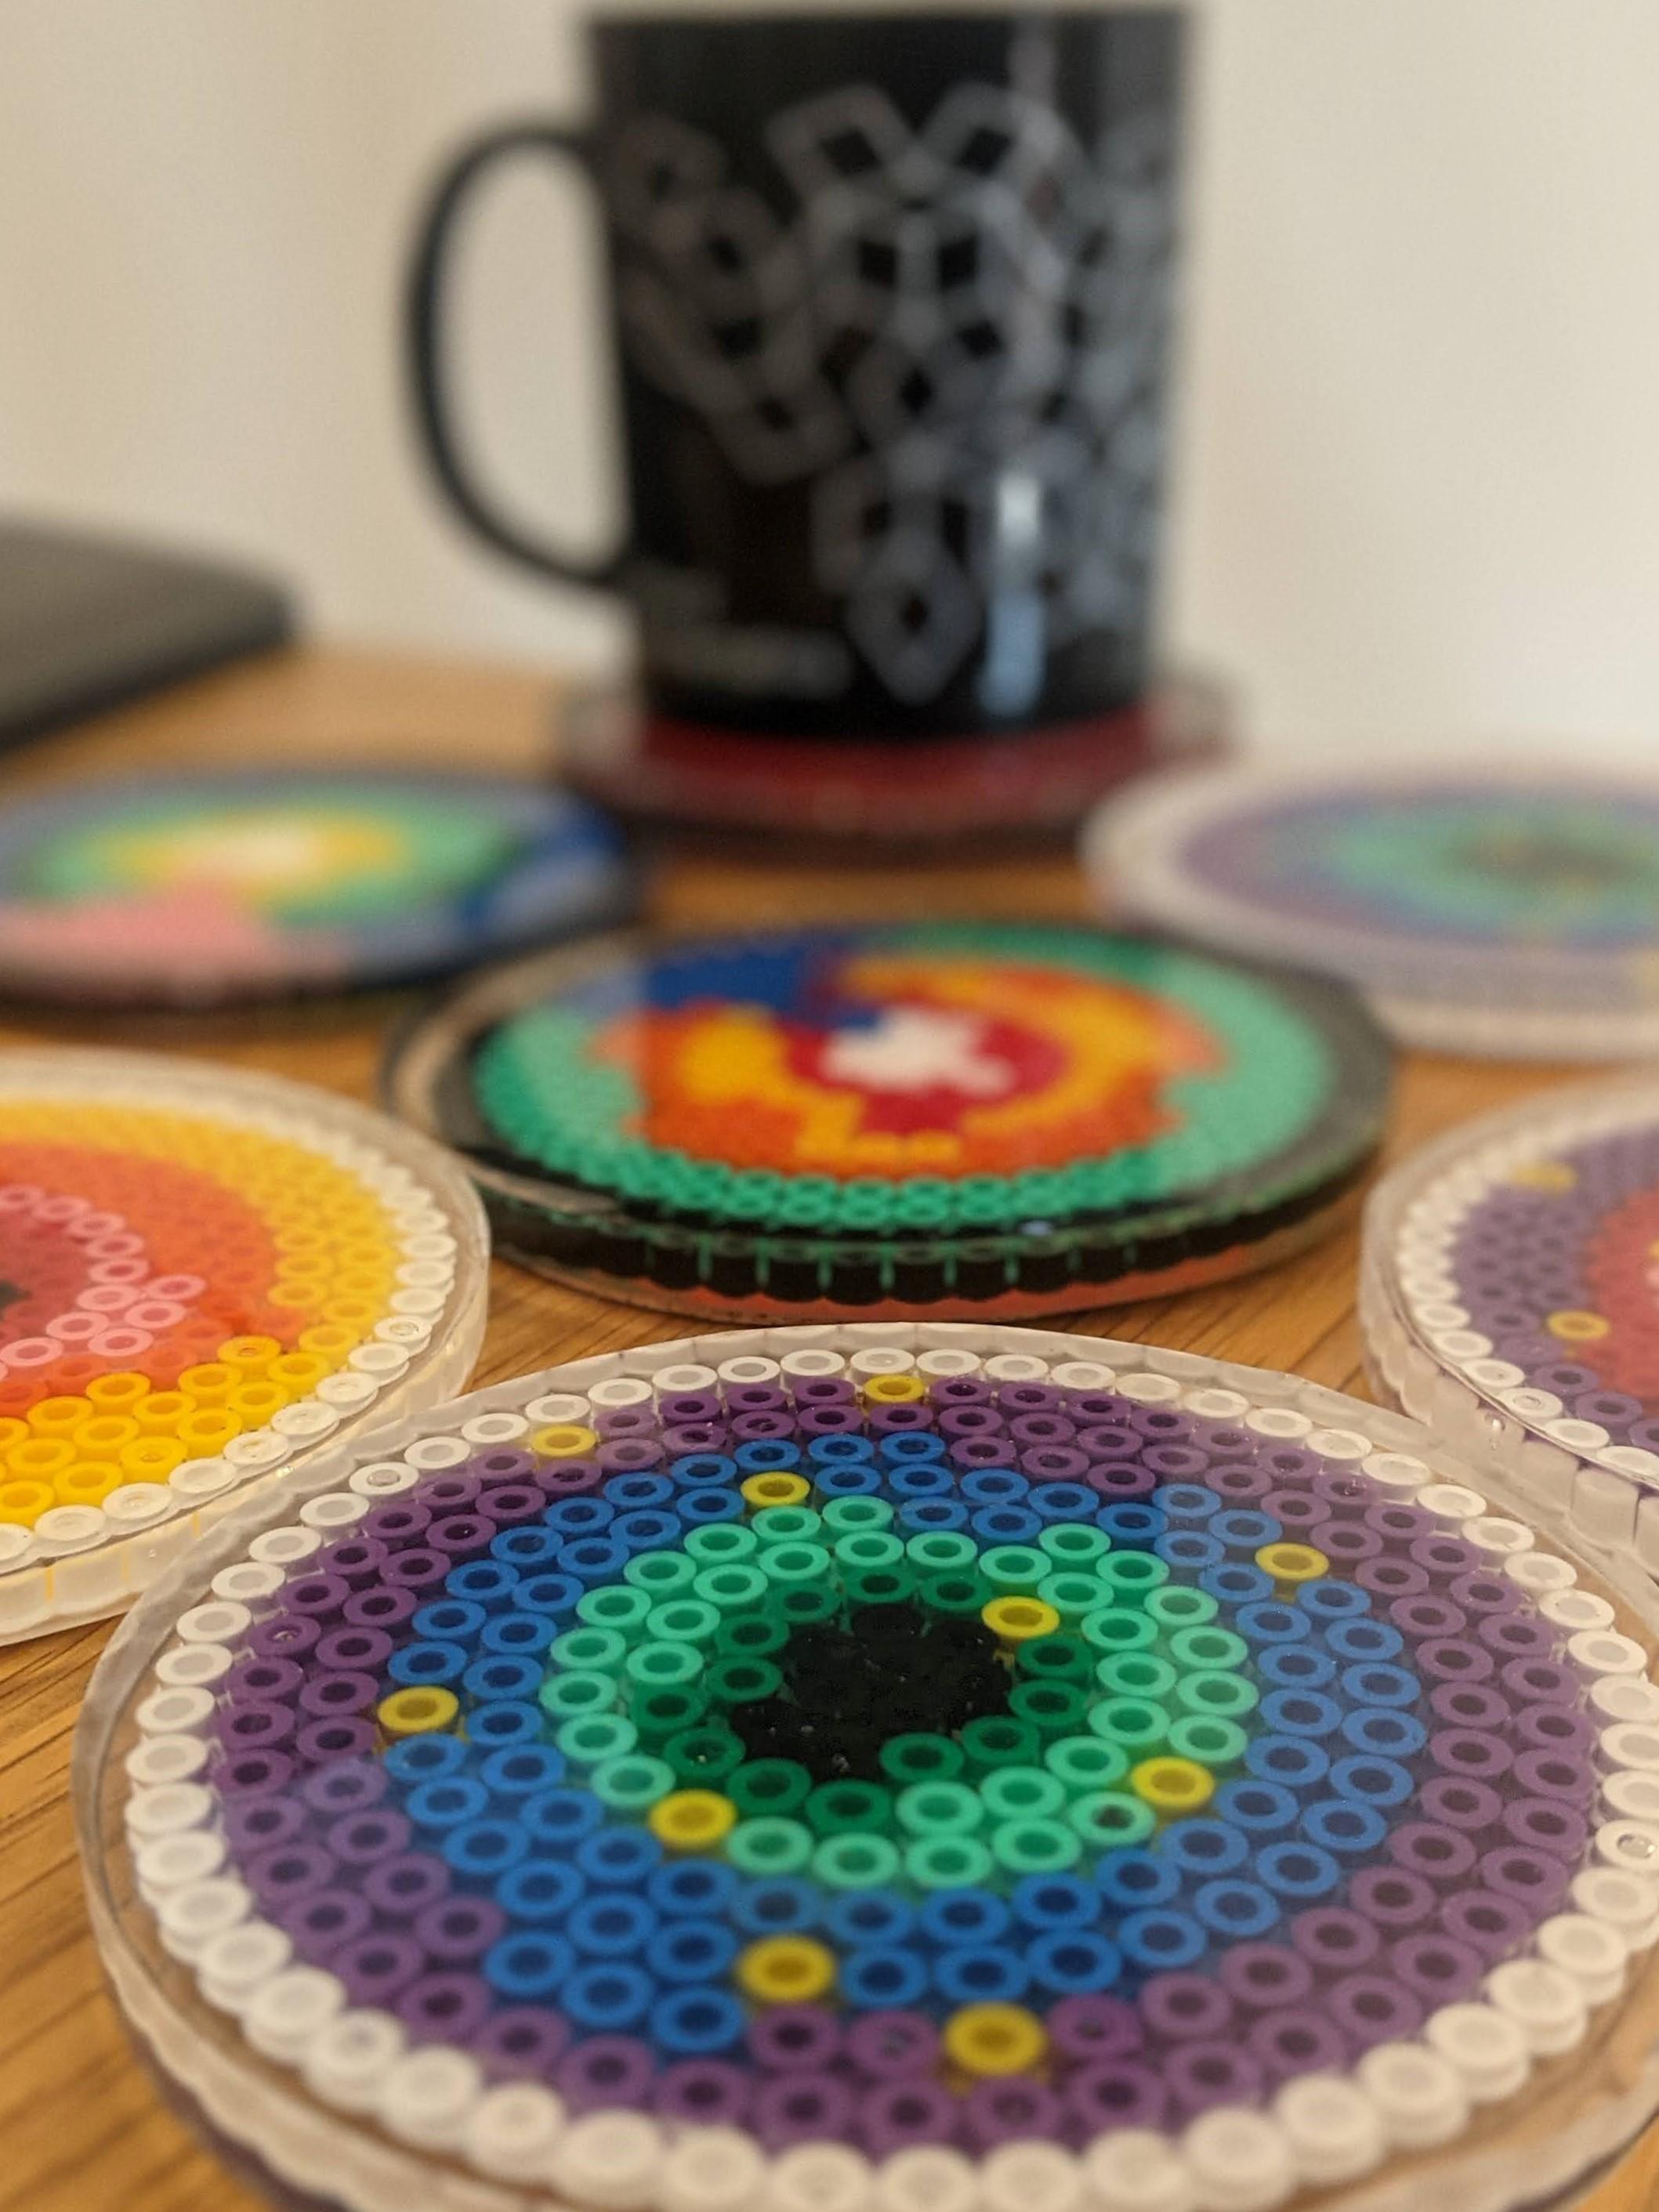 Coasters made from plastic beads in resin, showing show an agent-based model of microbeads infiltrating a tumour spheroid.